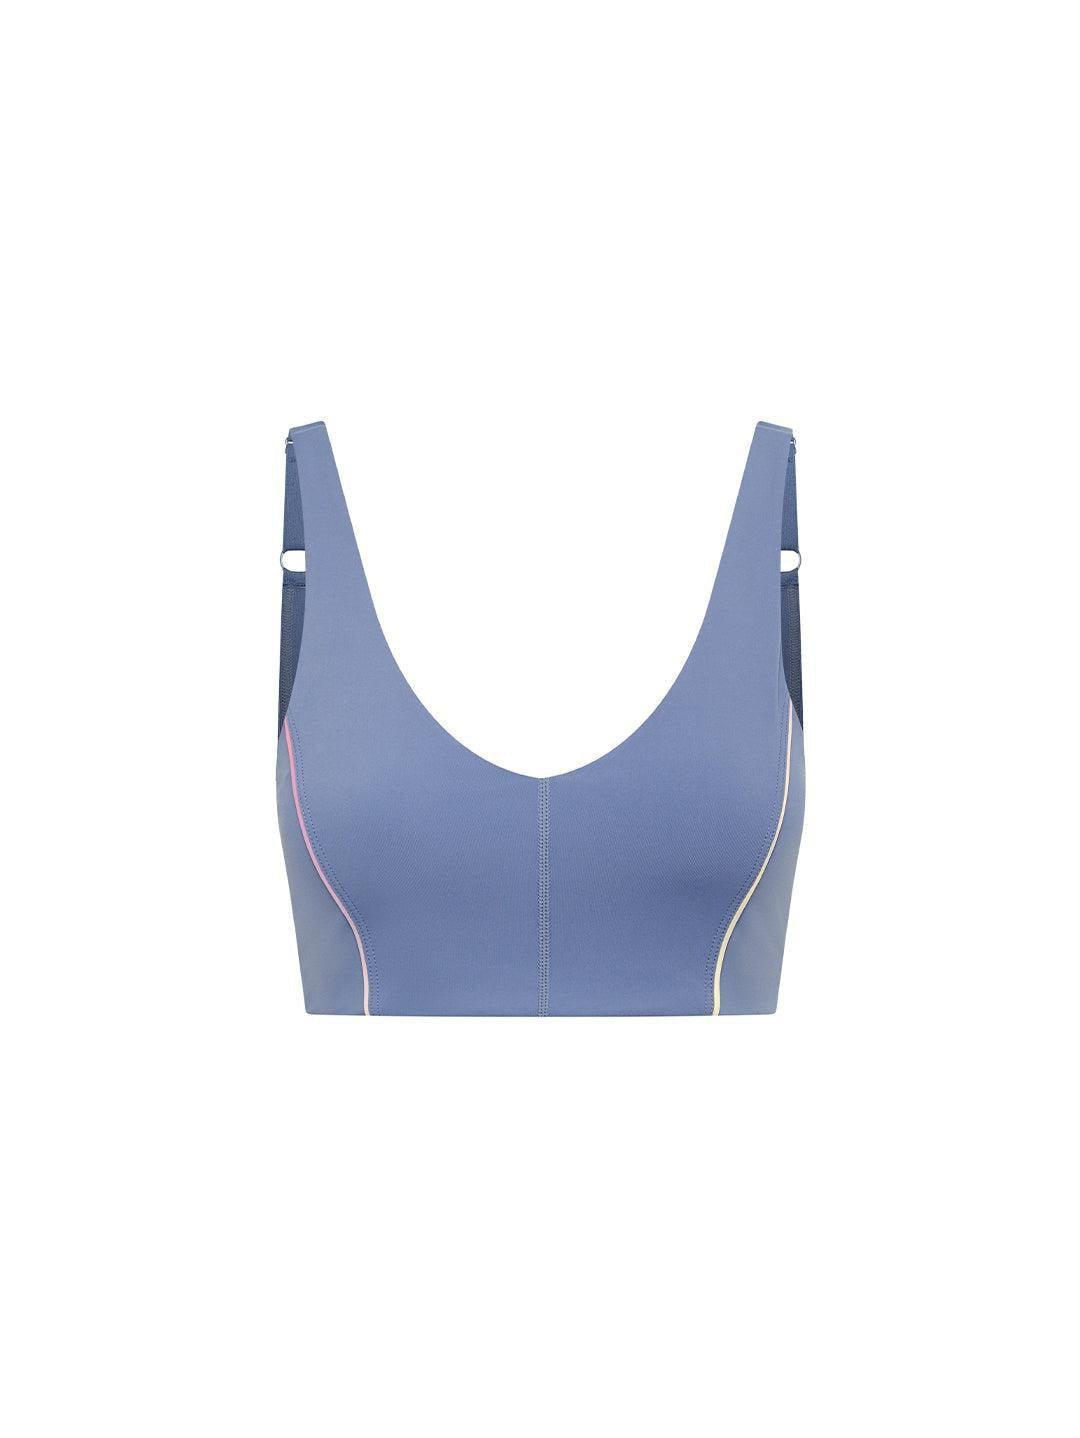 Nike Yoga Luxe light support crop top in blue